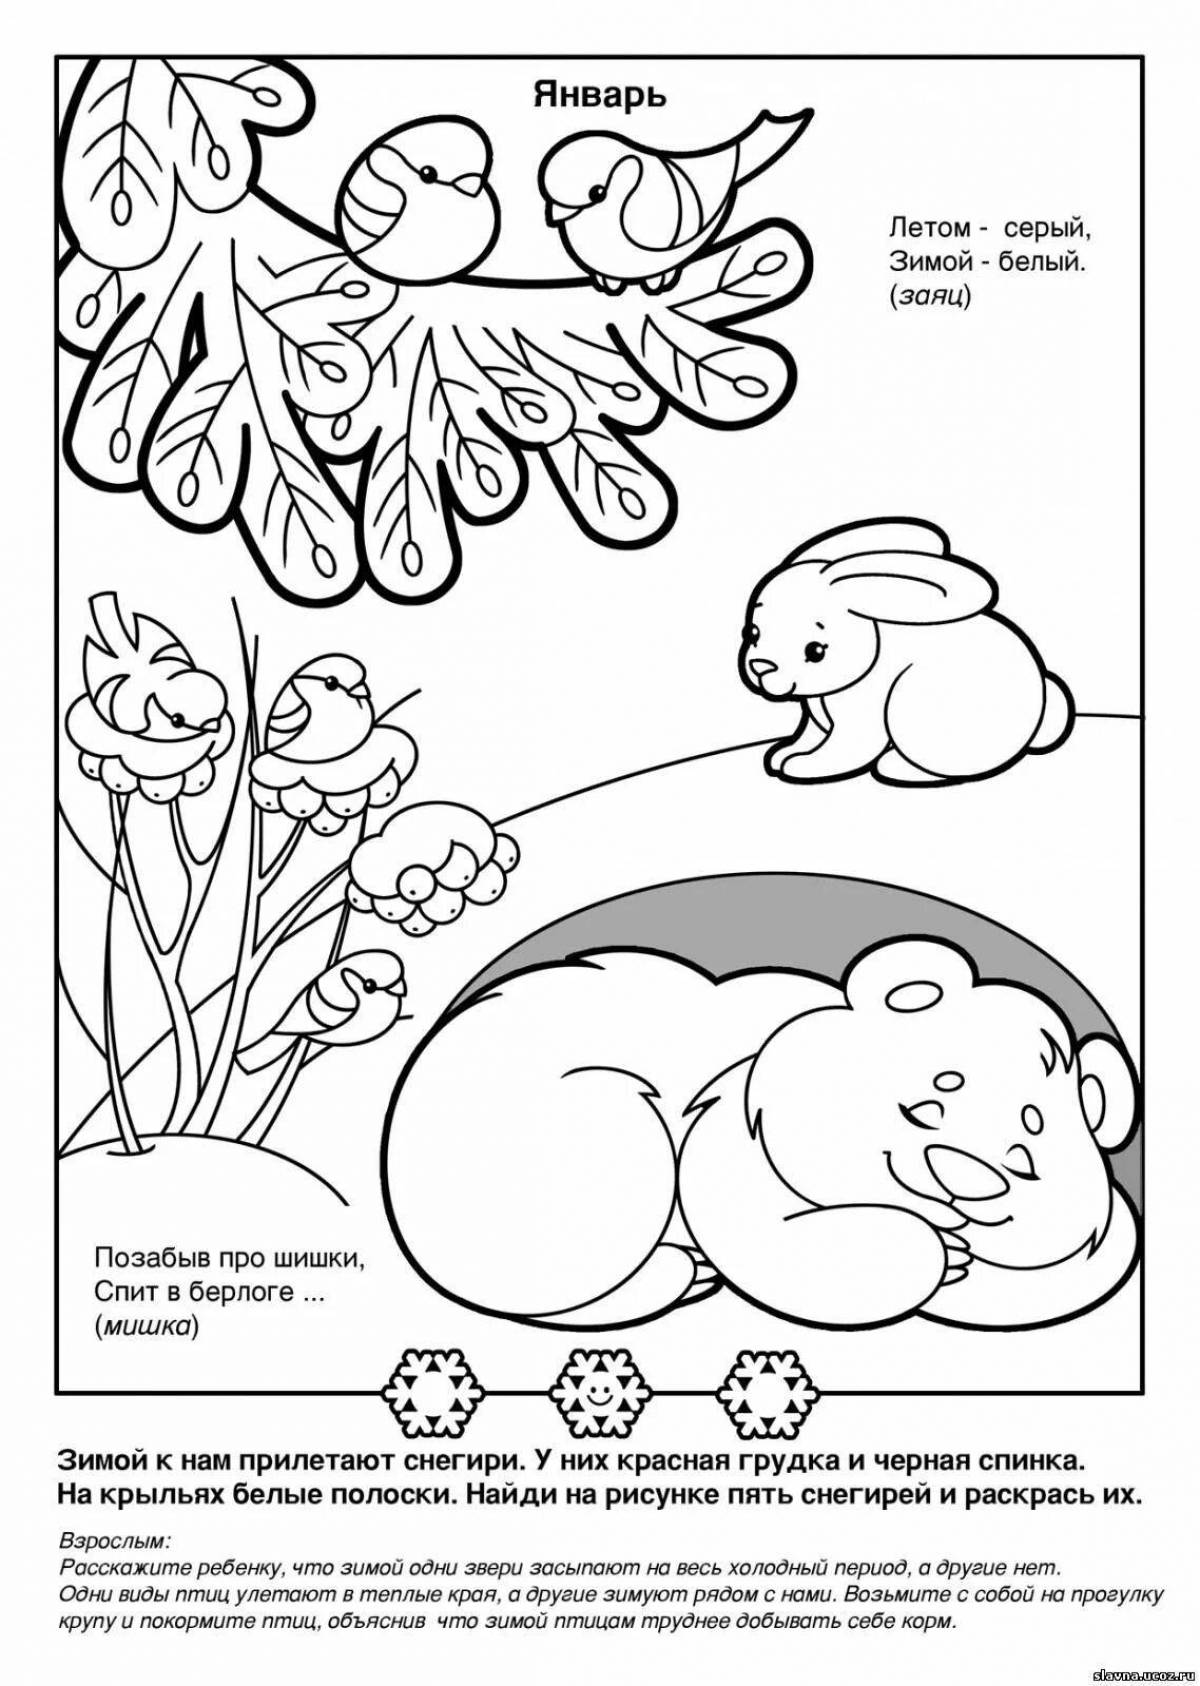 Crazy bear den coloring book for 3-4 year olds